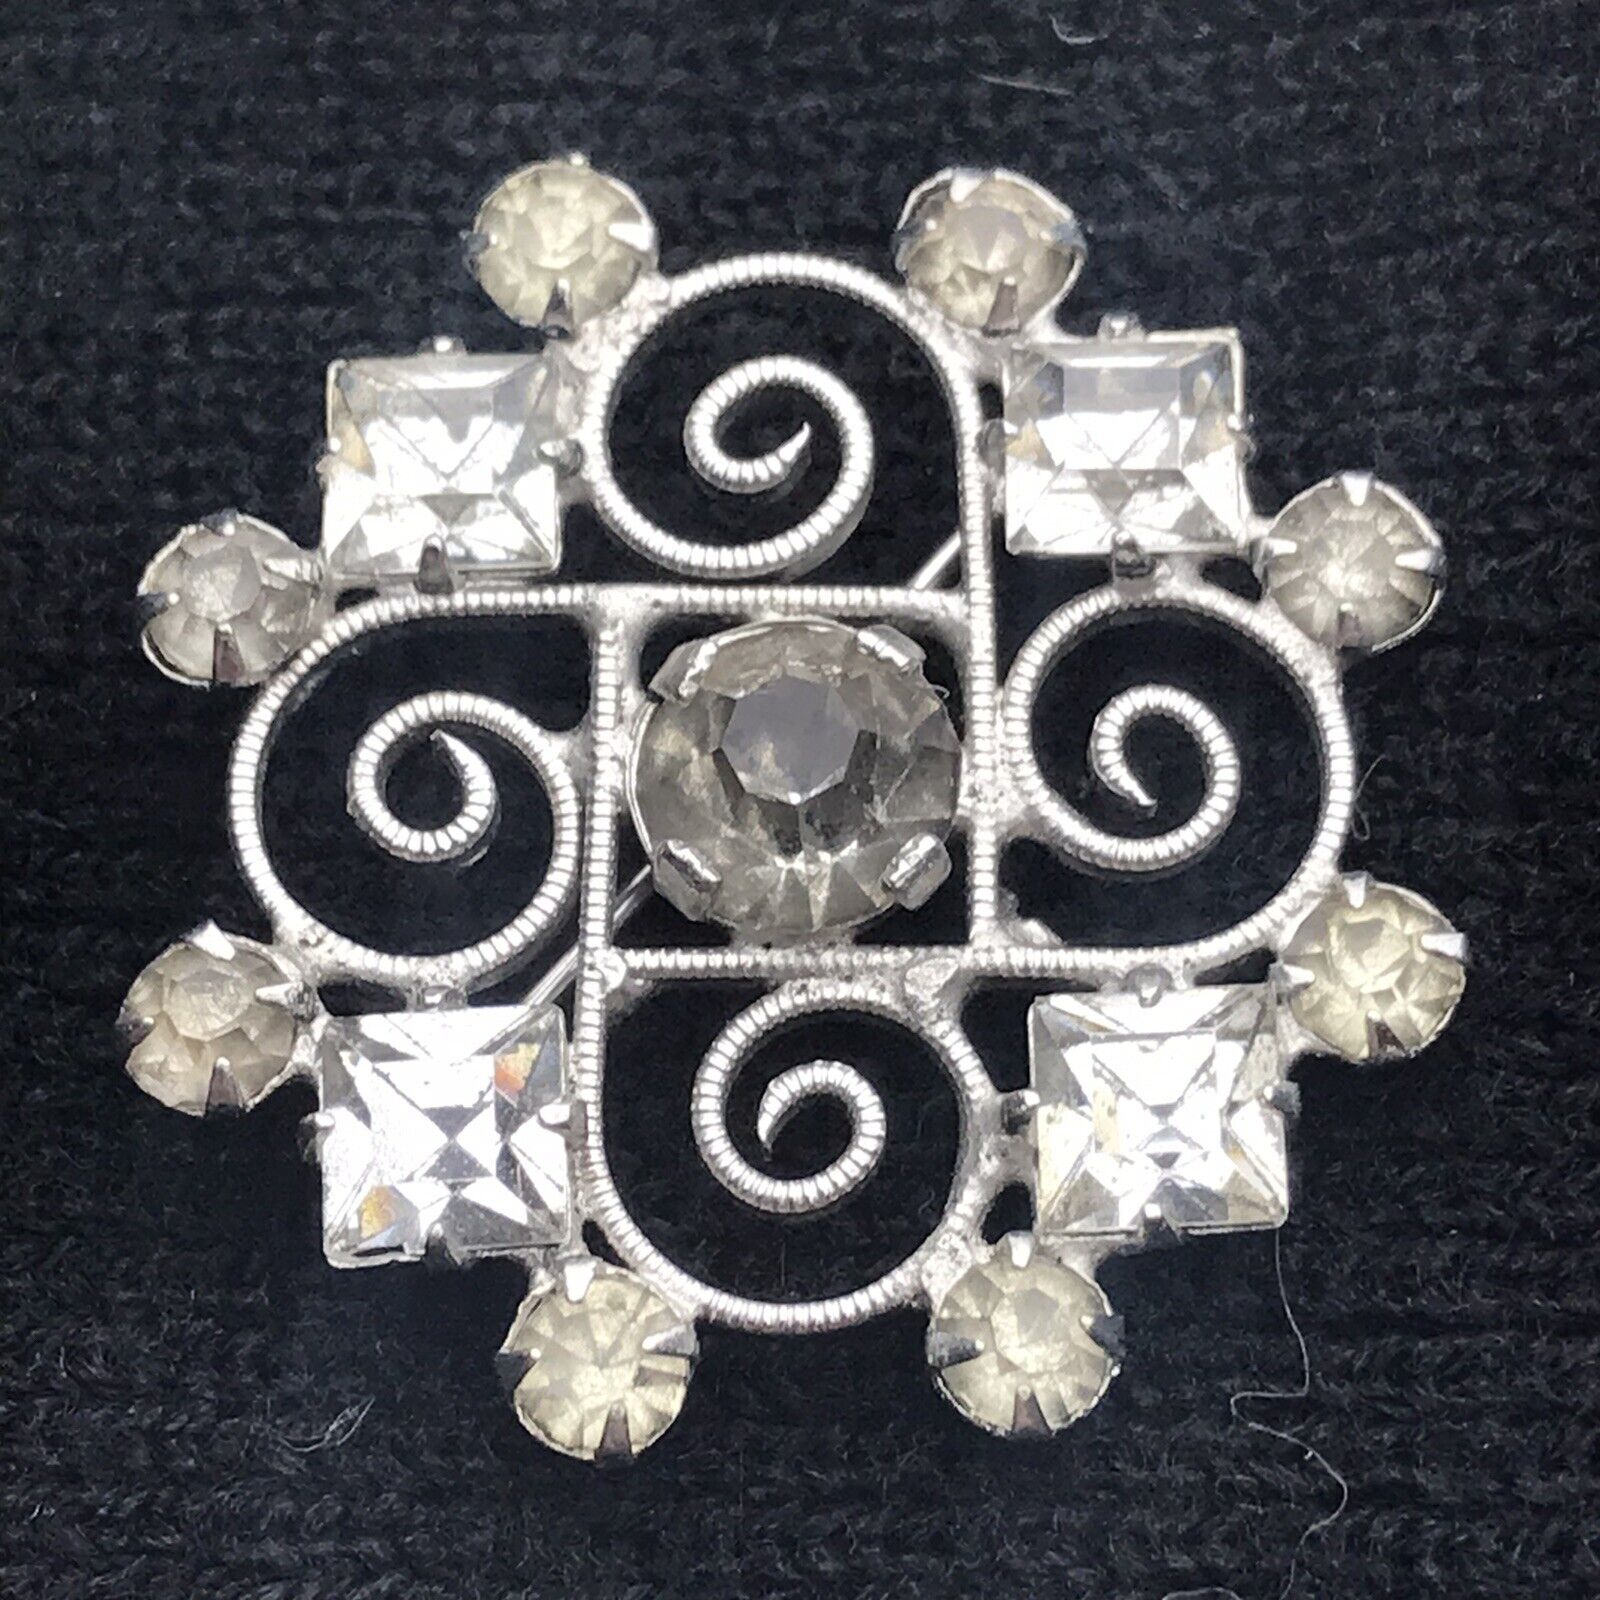 Vintage Silver Tone Scroll Work Shiny Stones or Glass Bling Brooch Pin